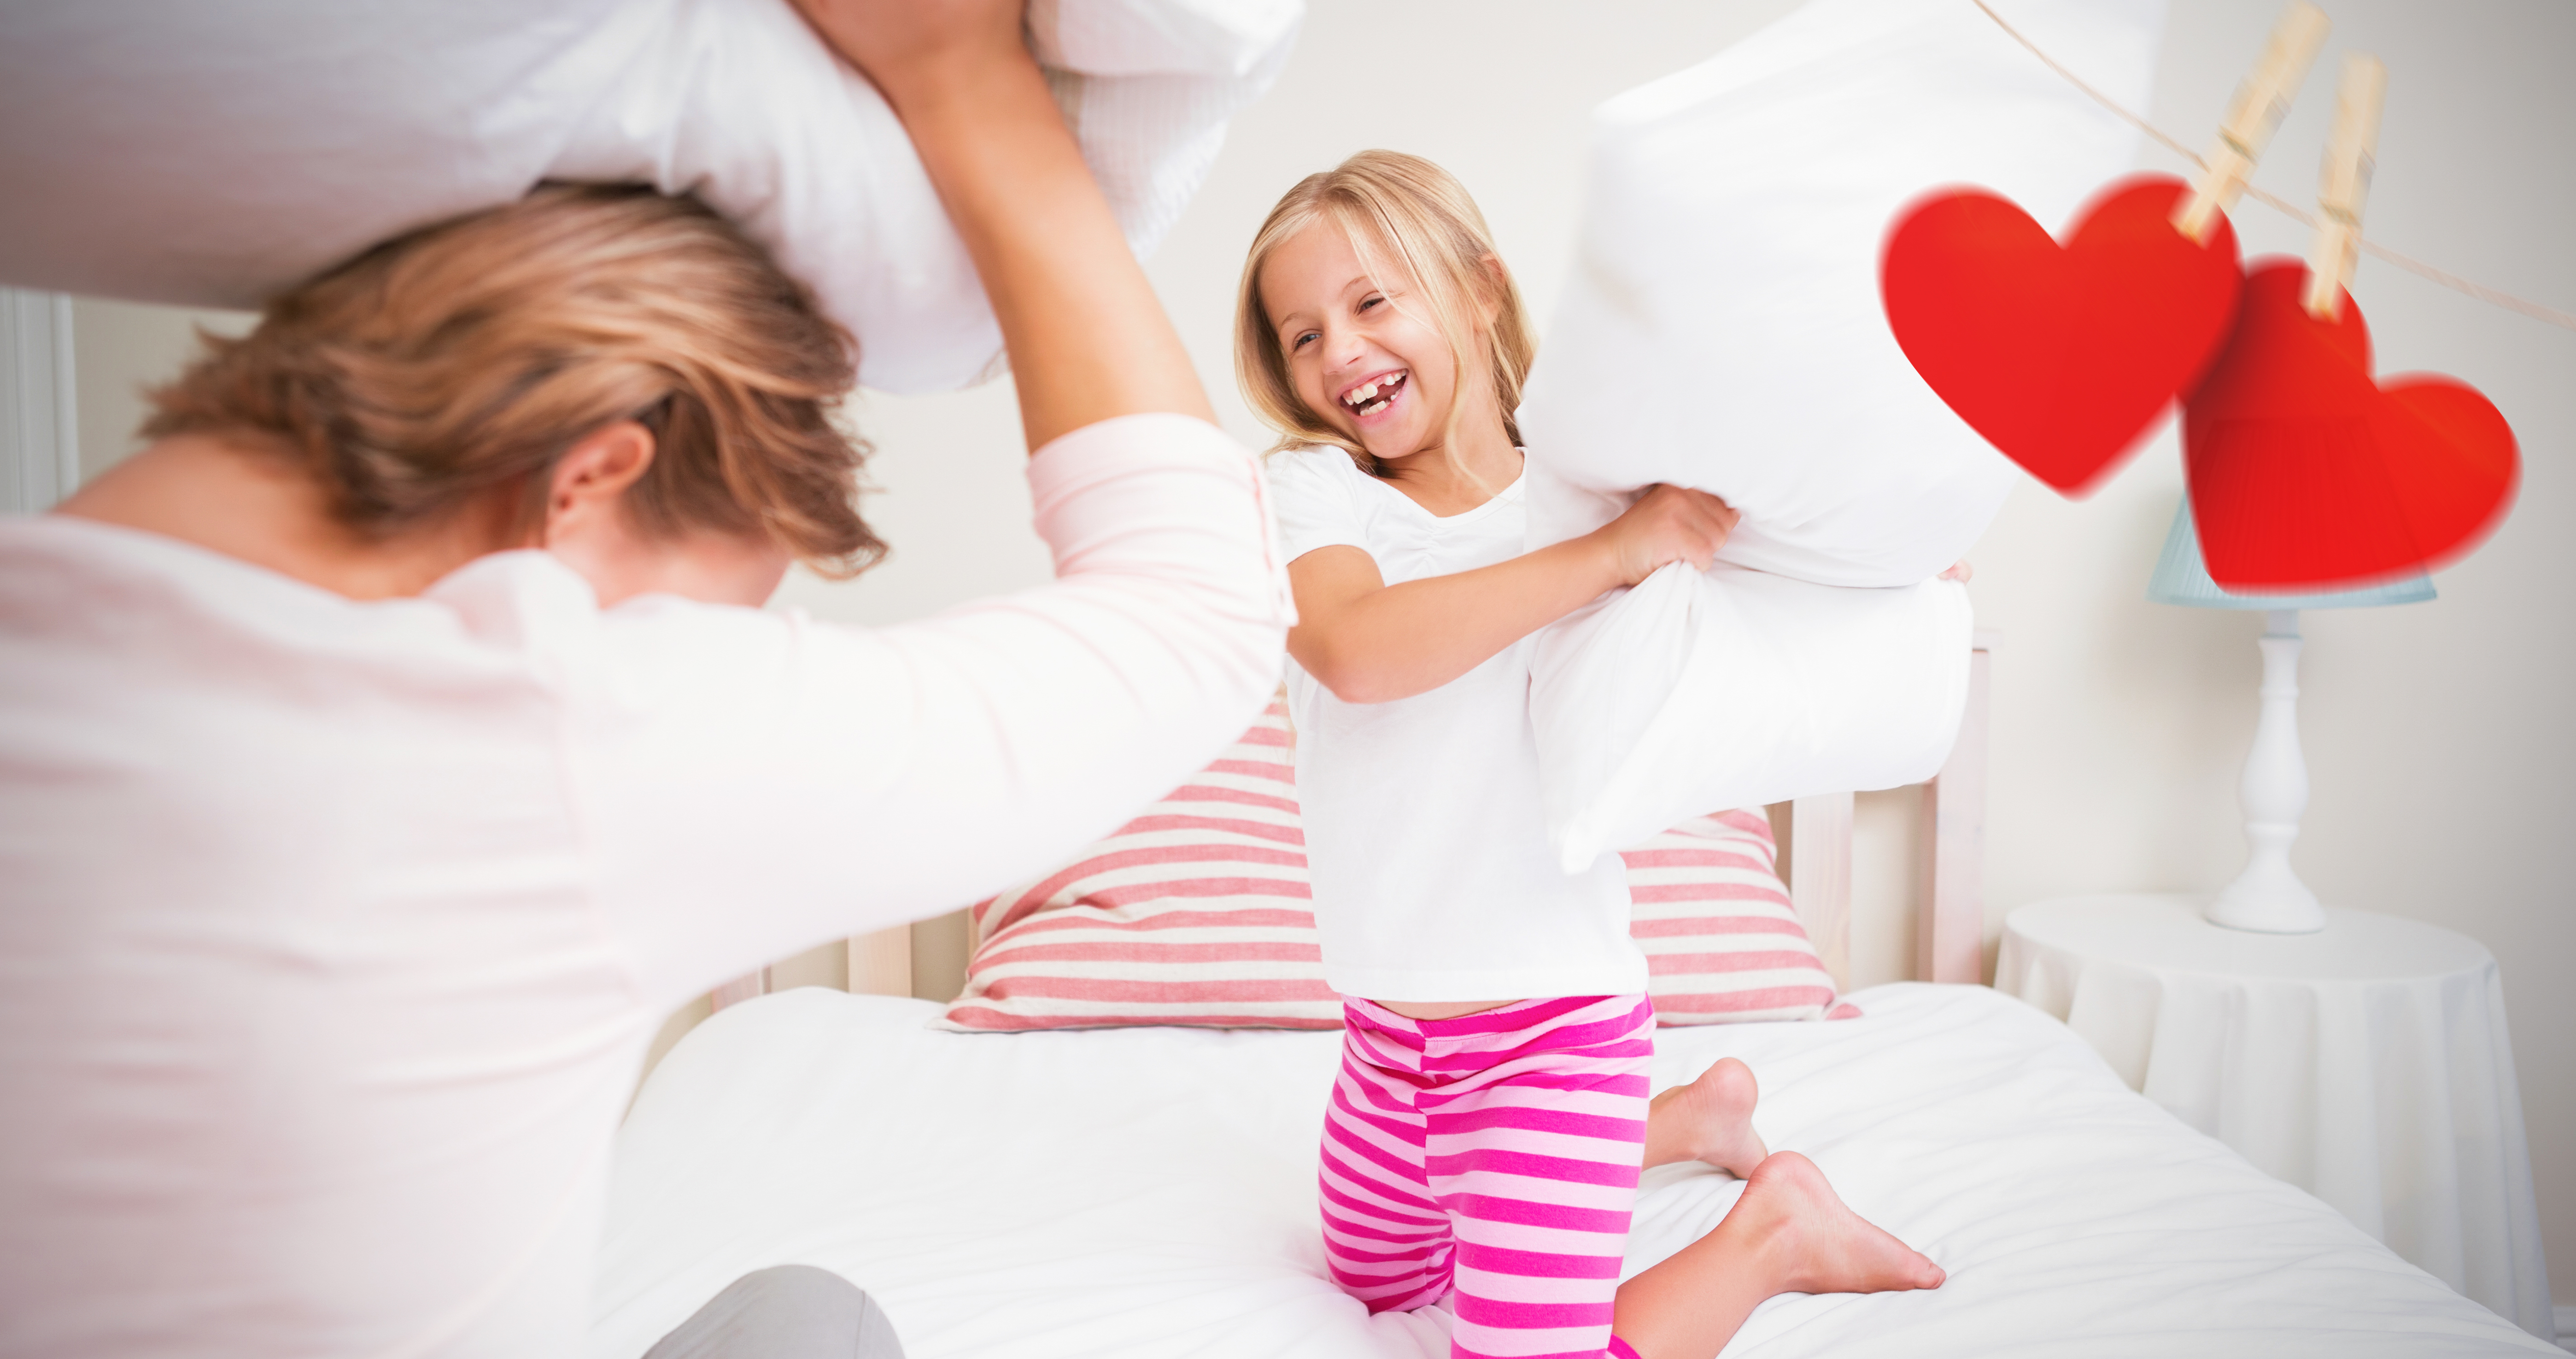 Composite Image Of Mother And Daughter Fighting With Pillows On Heber 